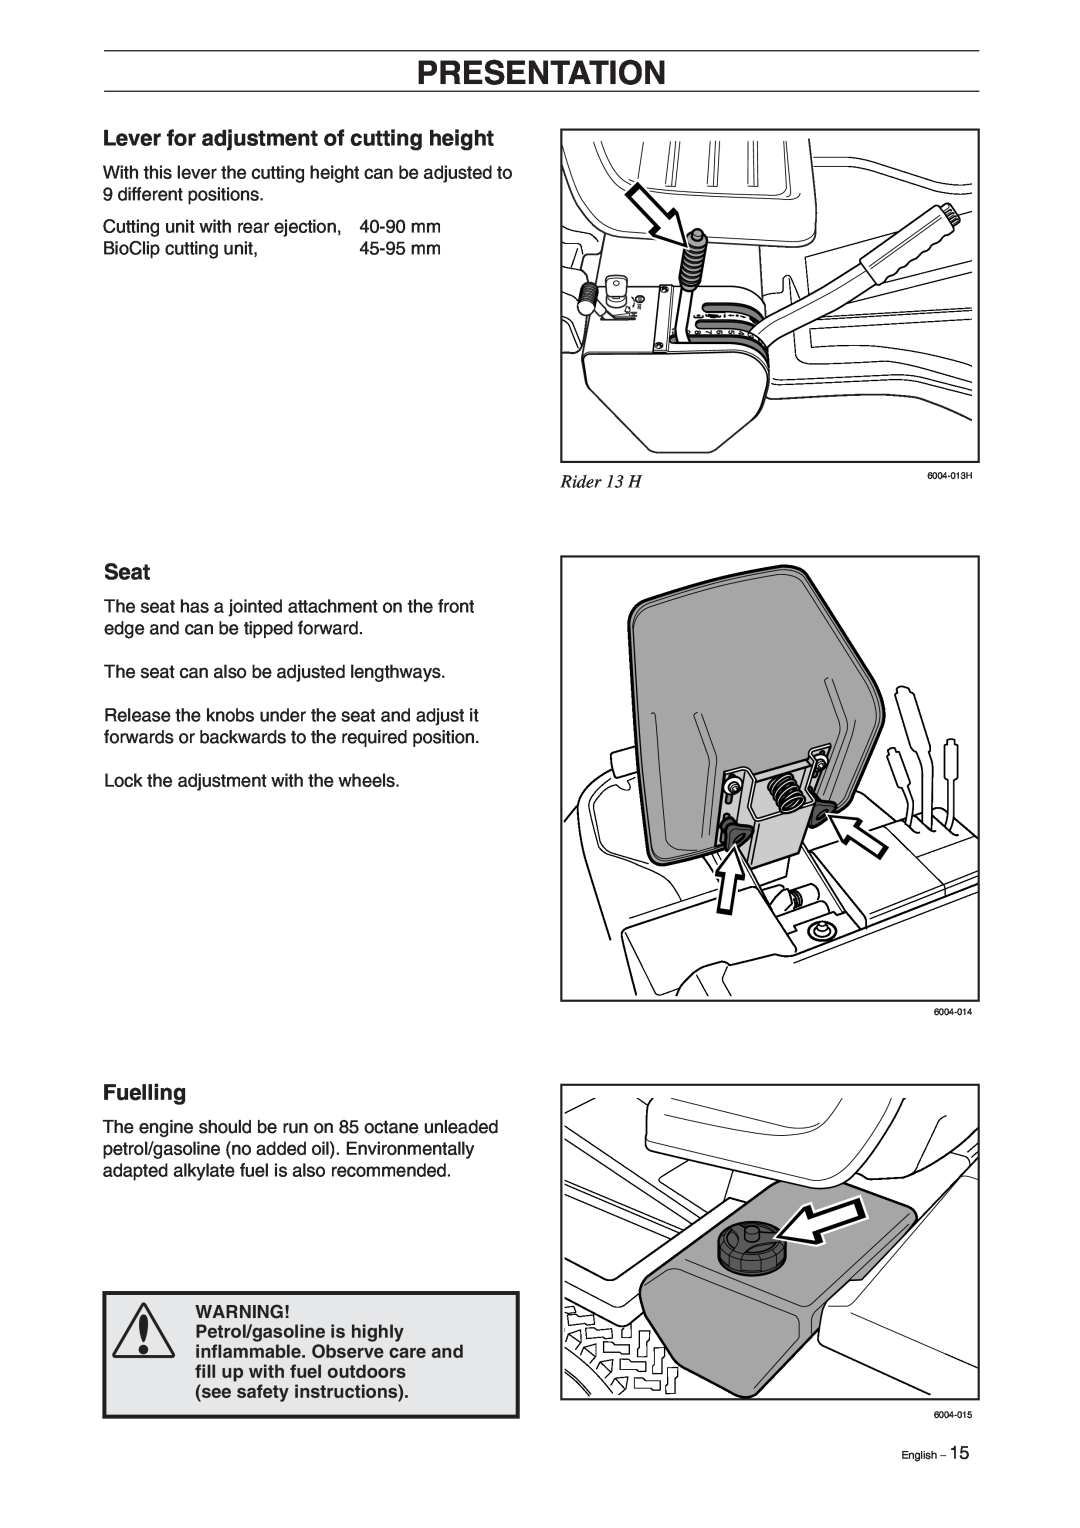 Husqvarna Lever for adjustment of cutting height, Seat, Fuelling, Rider 13 H, see safety instructions, Presentation 